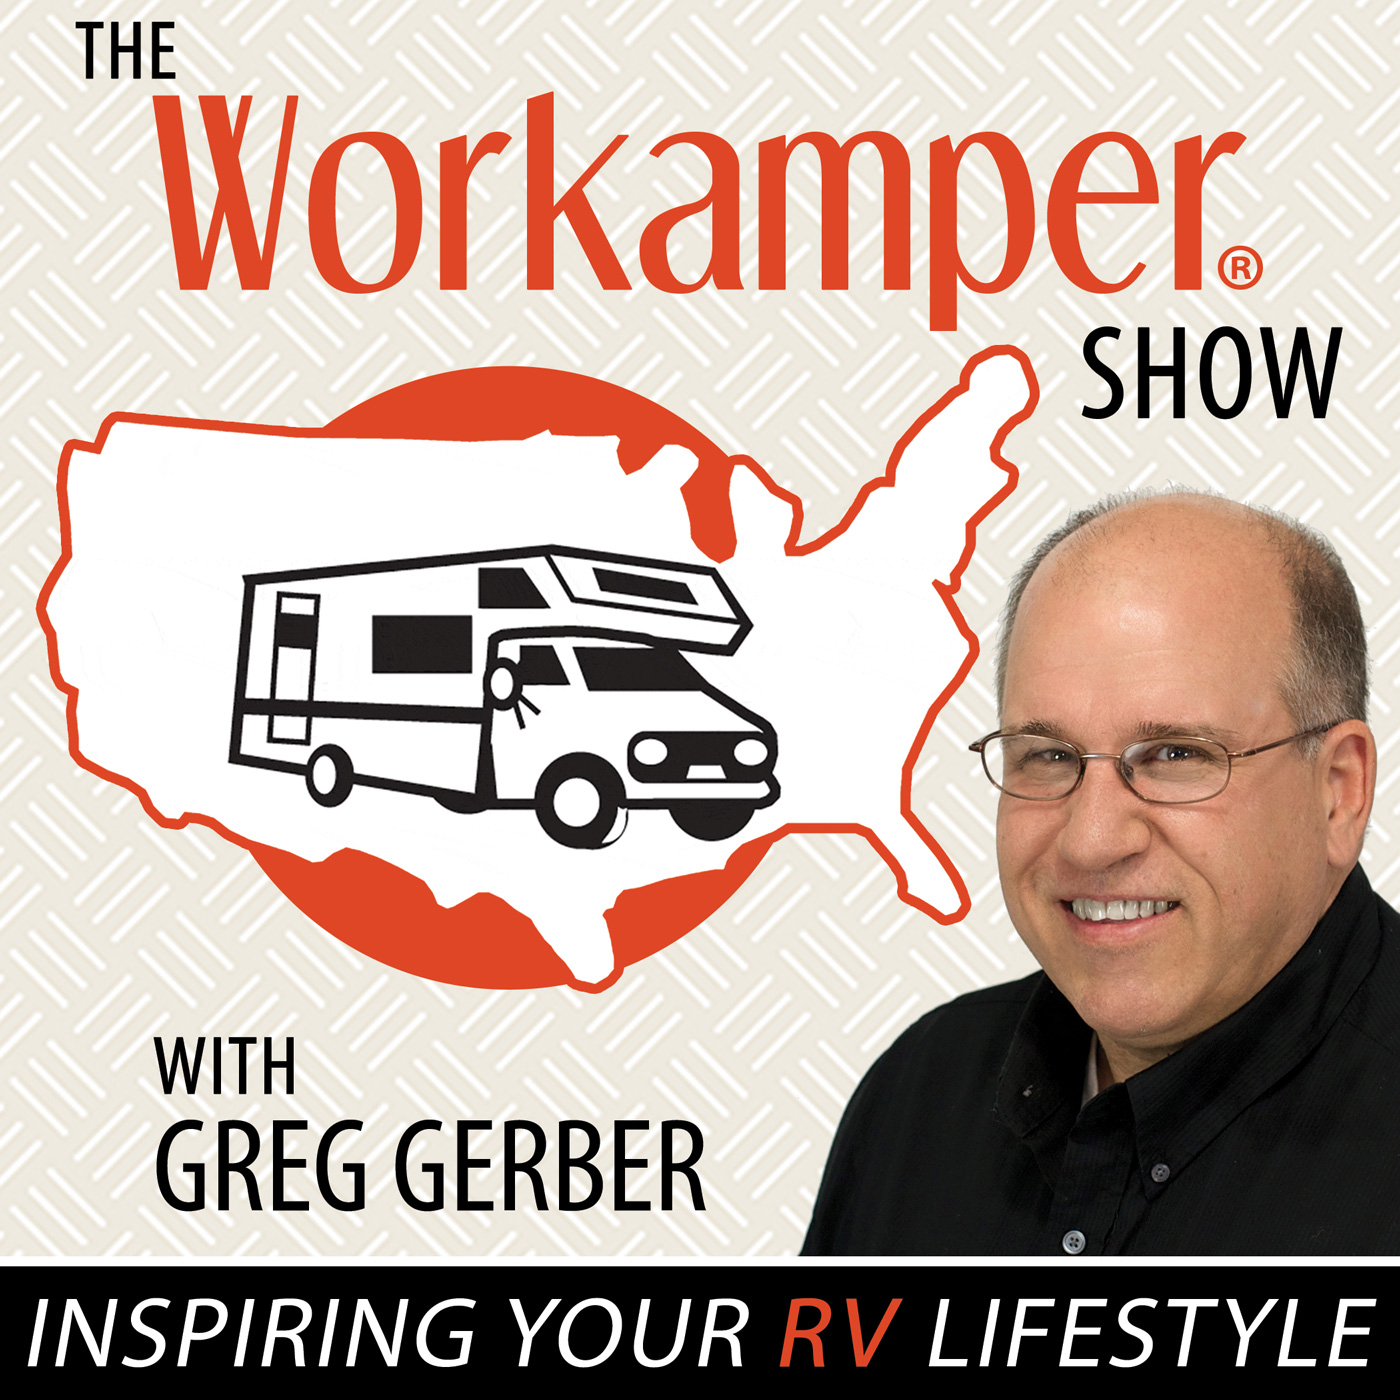 The Workamper Show Podcast